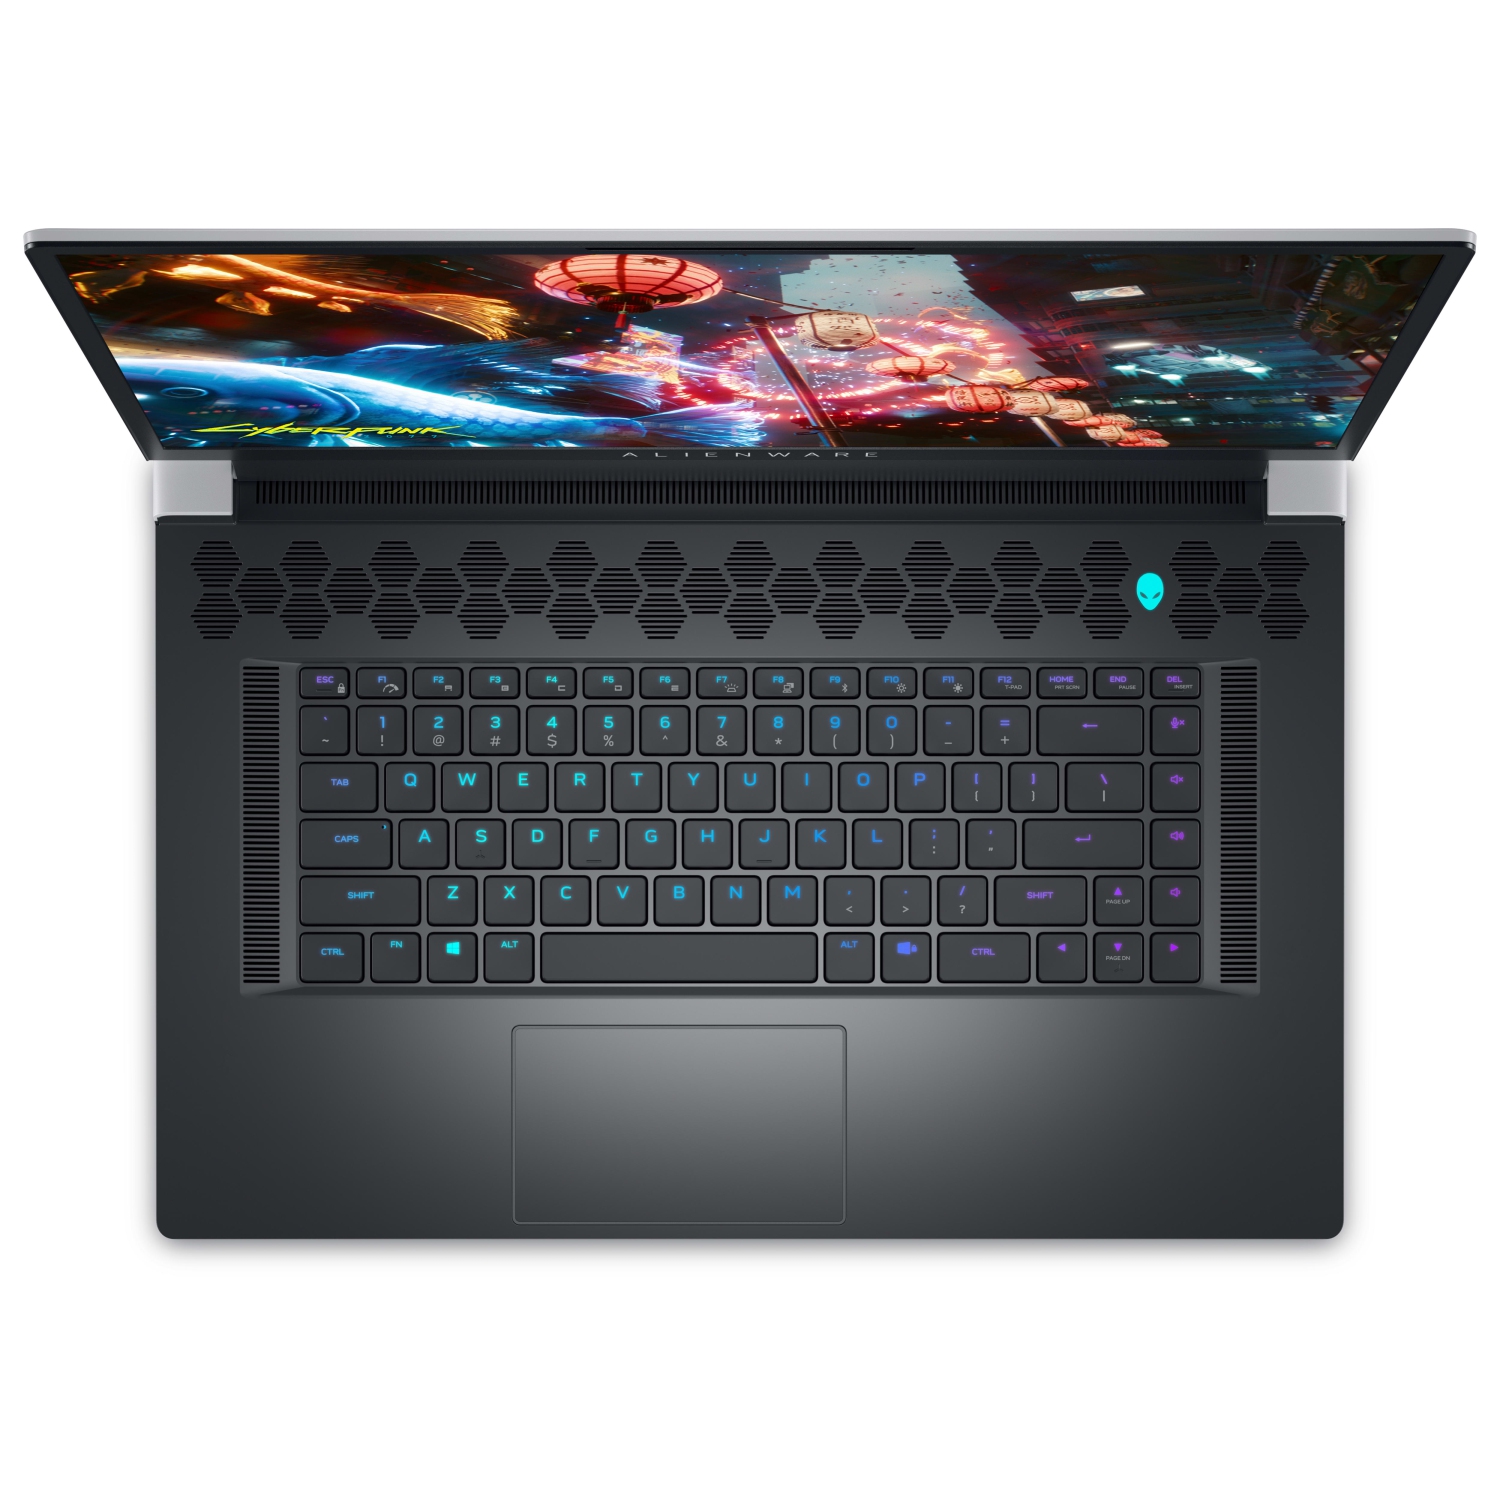 Refurbished (Excellent) – Dell Alienware X17 R2 Gaming Laptop (2022) | 17.3" FHD | Core i9 - 1TB SSD - 32GB RAM - RTX 3080 | 14 Cores @ 5 GHz - 12th Gen CPU - 8GB GDDR6X